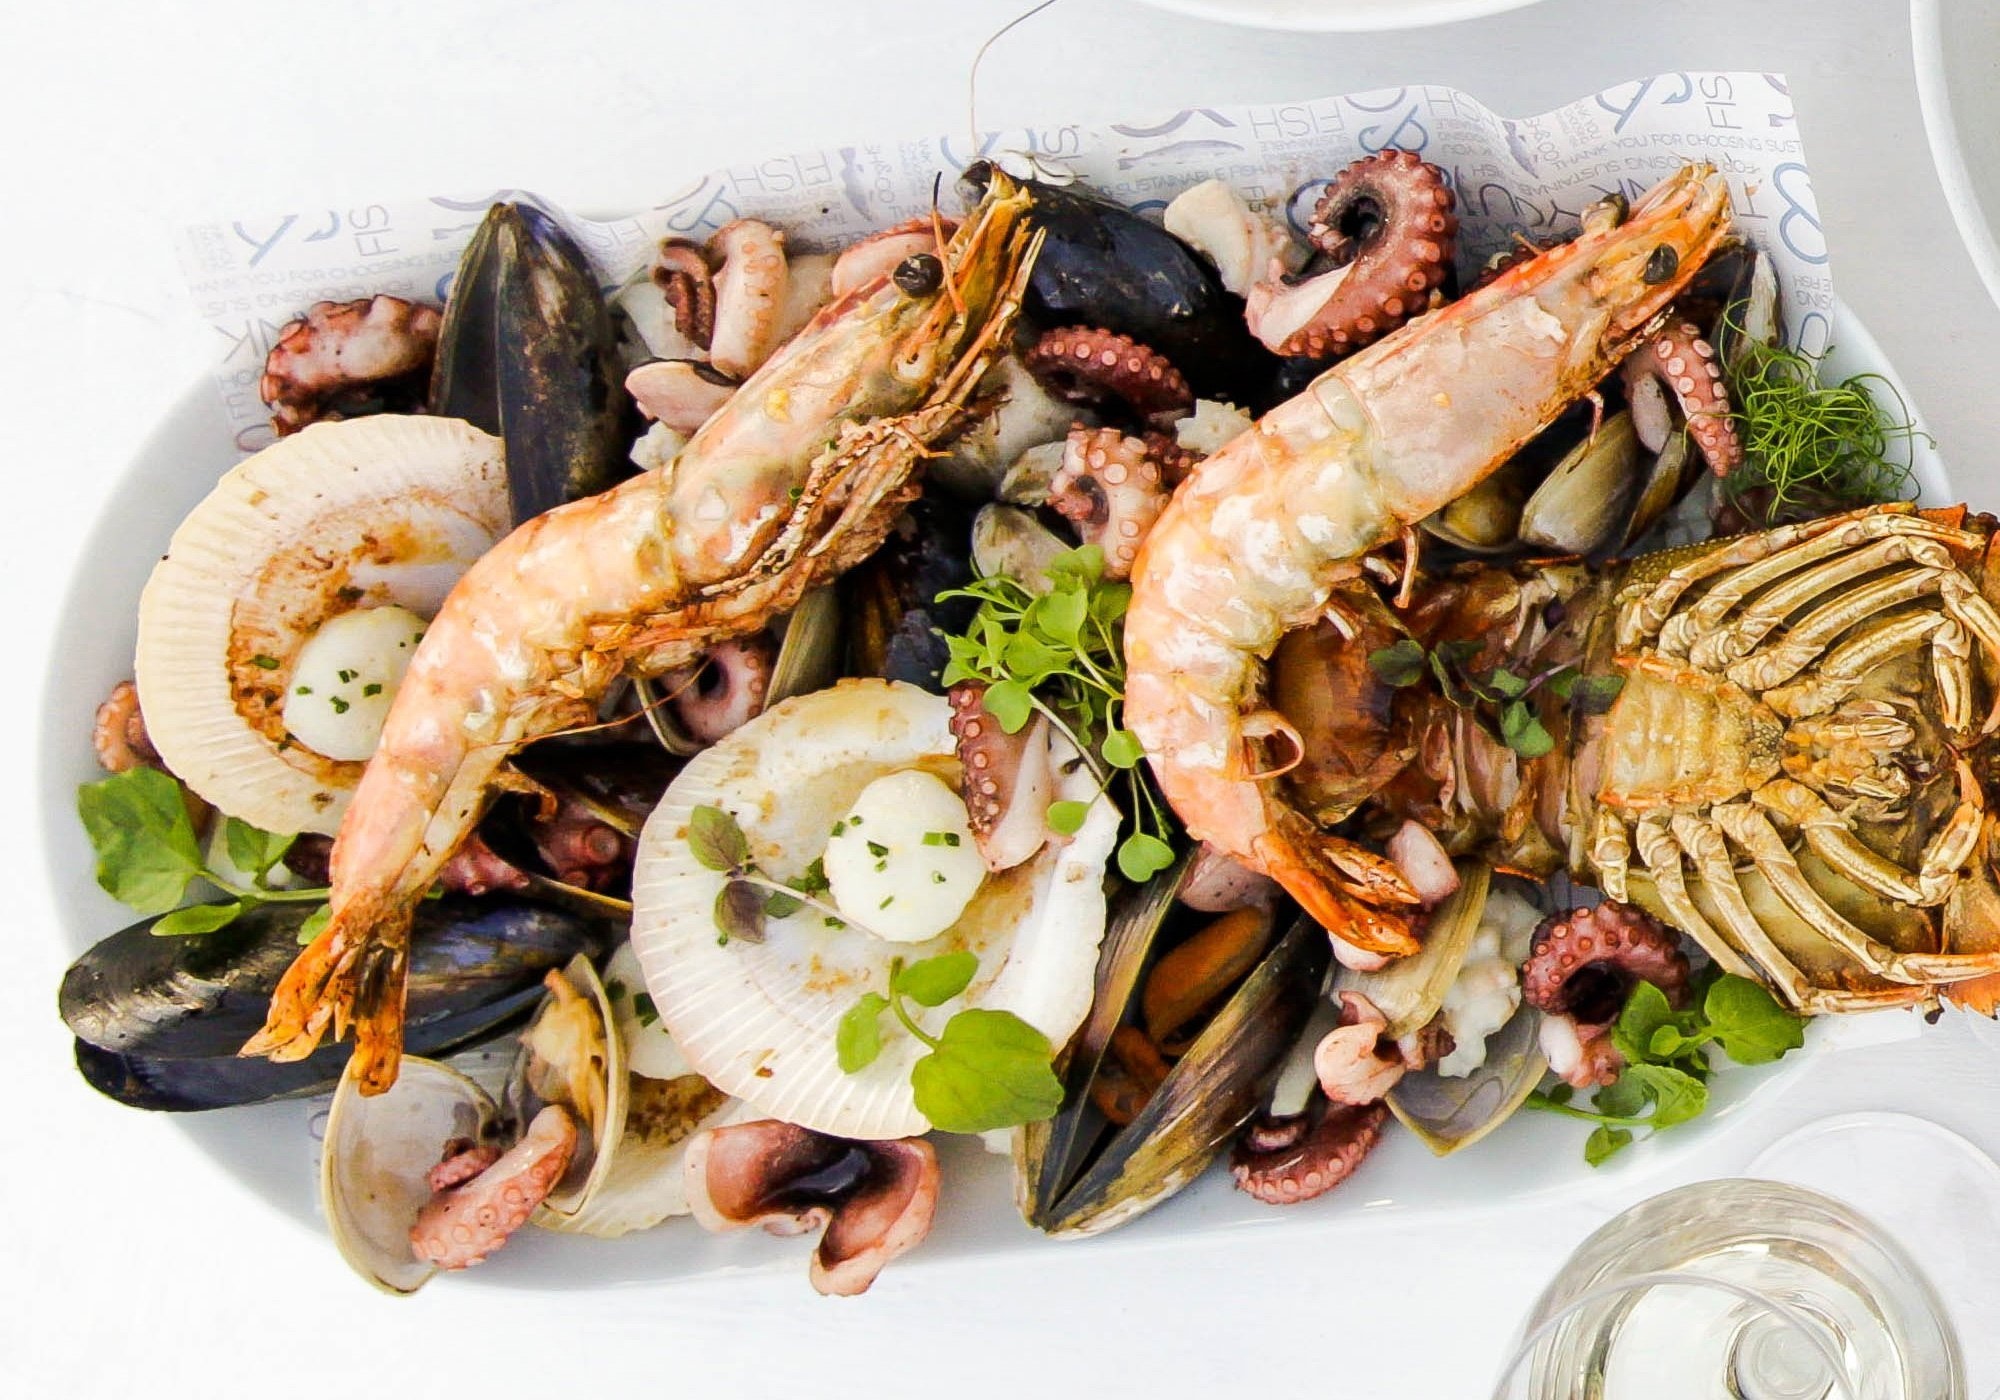 Seafood: Shellfish platter, A seafood dish of raw and cooked shellfish served cold on a platter. 2000x1400 HD Background.